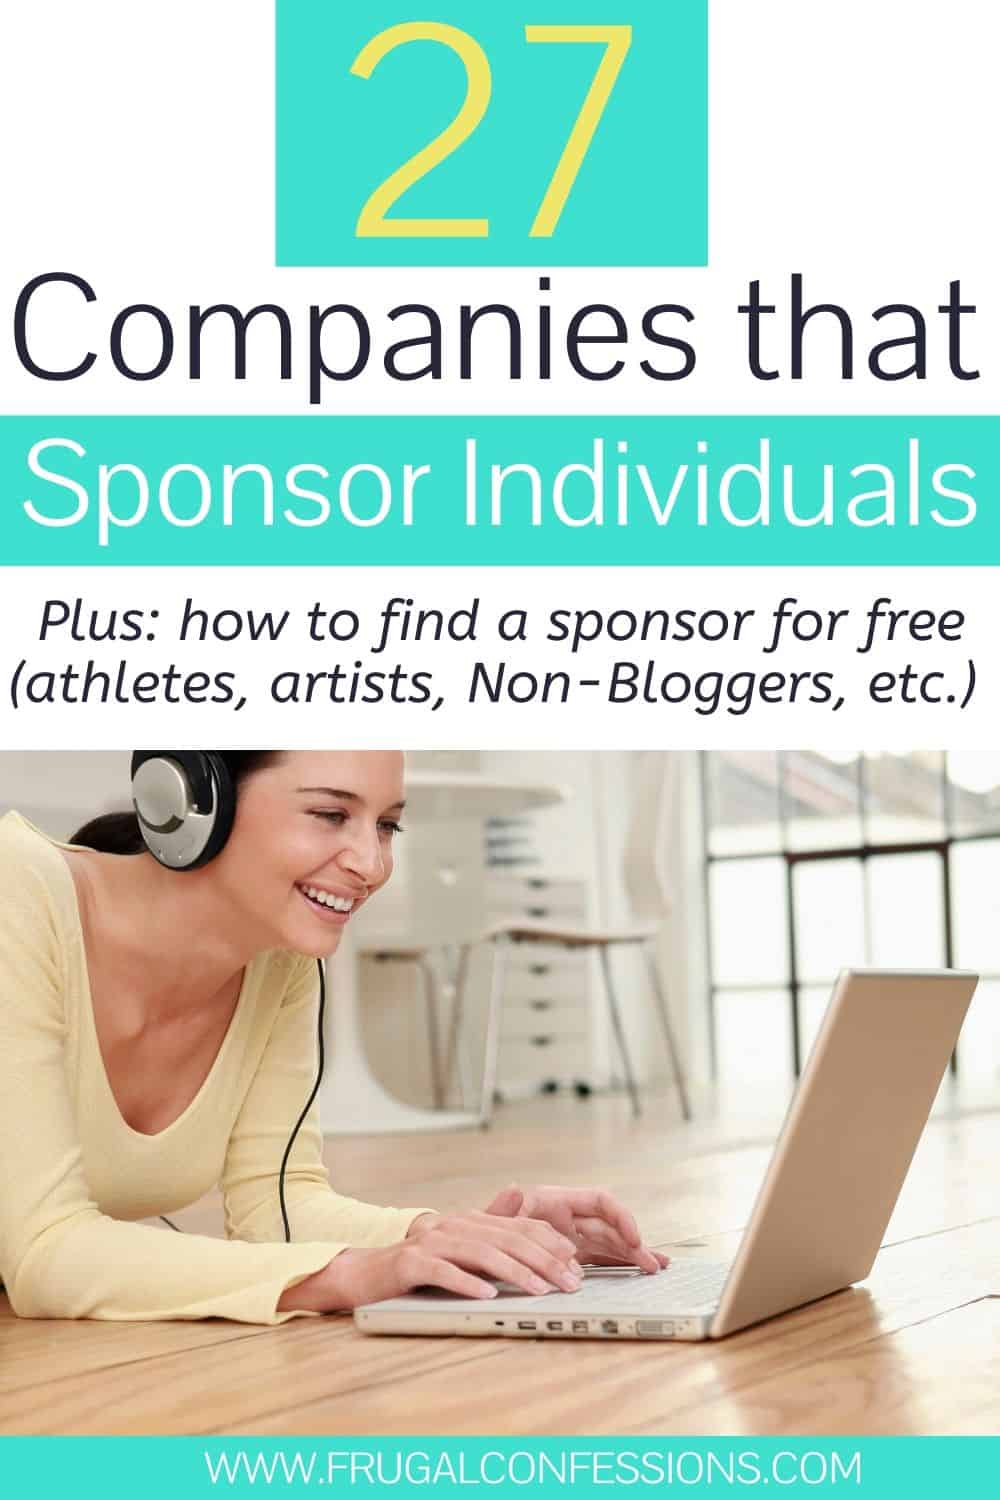 woman on laptop looking for sponsorships, text overlay "27 companies that sponsor individuals"